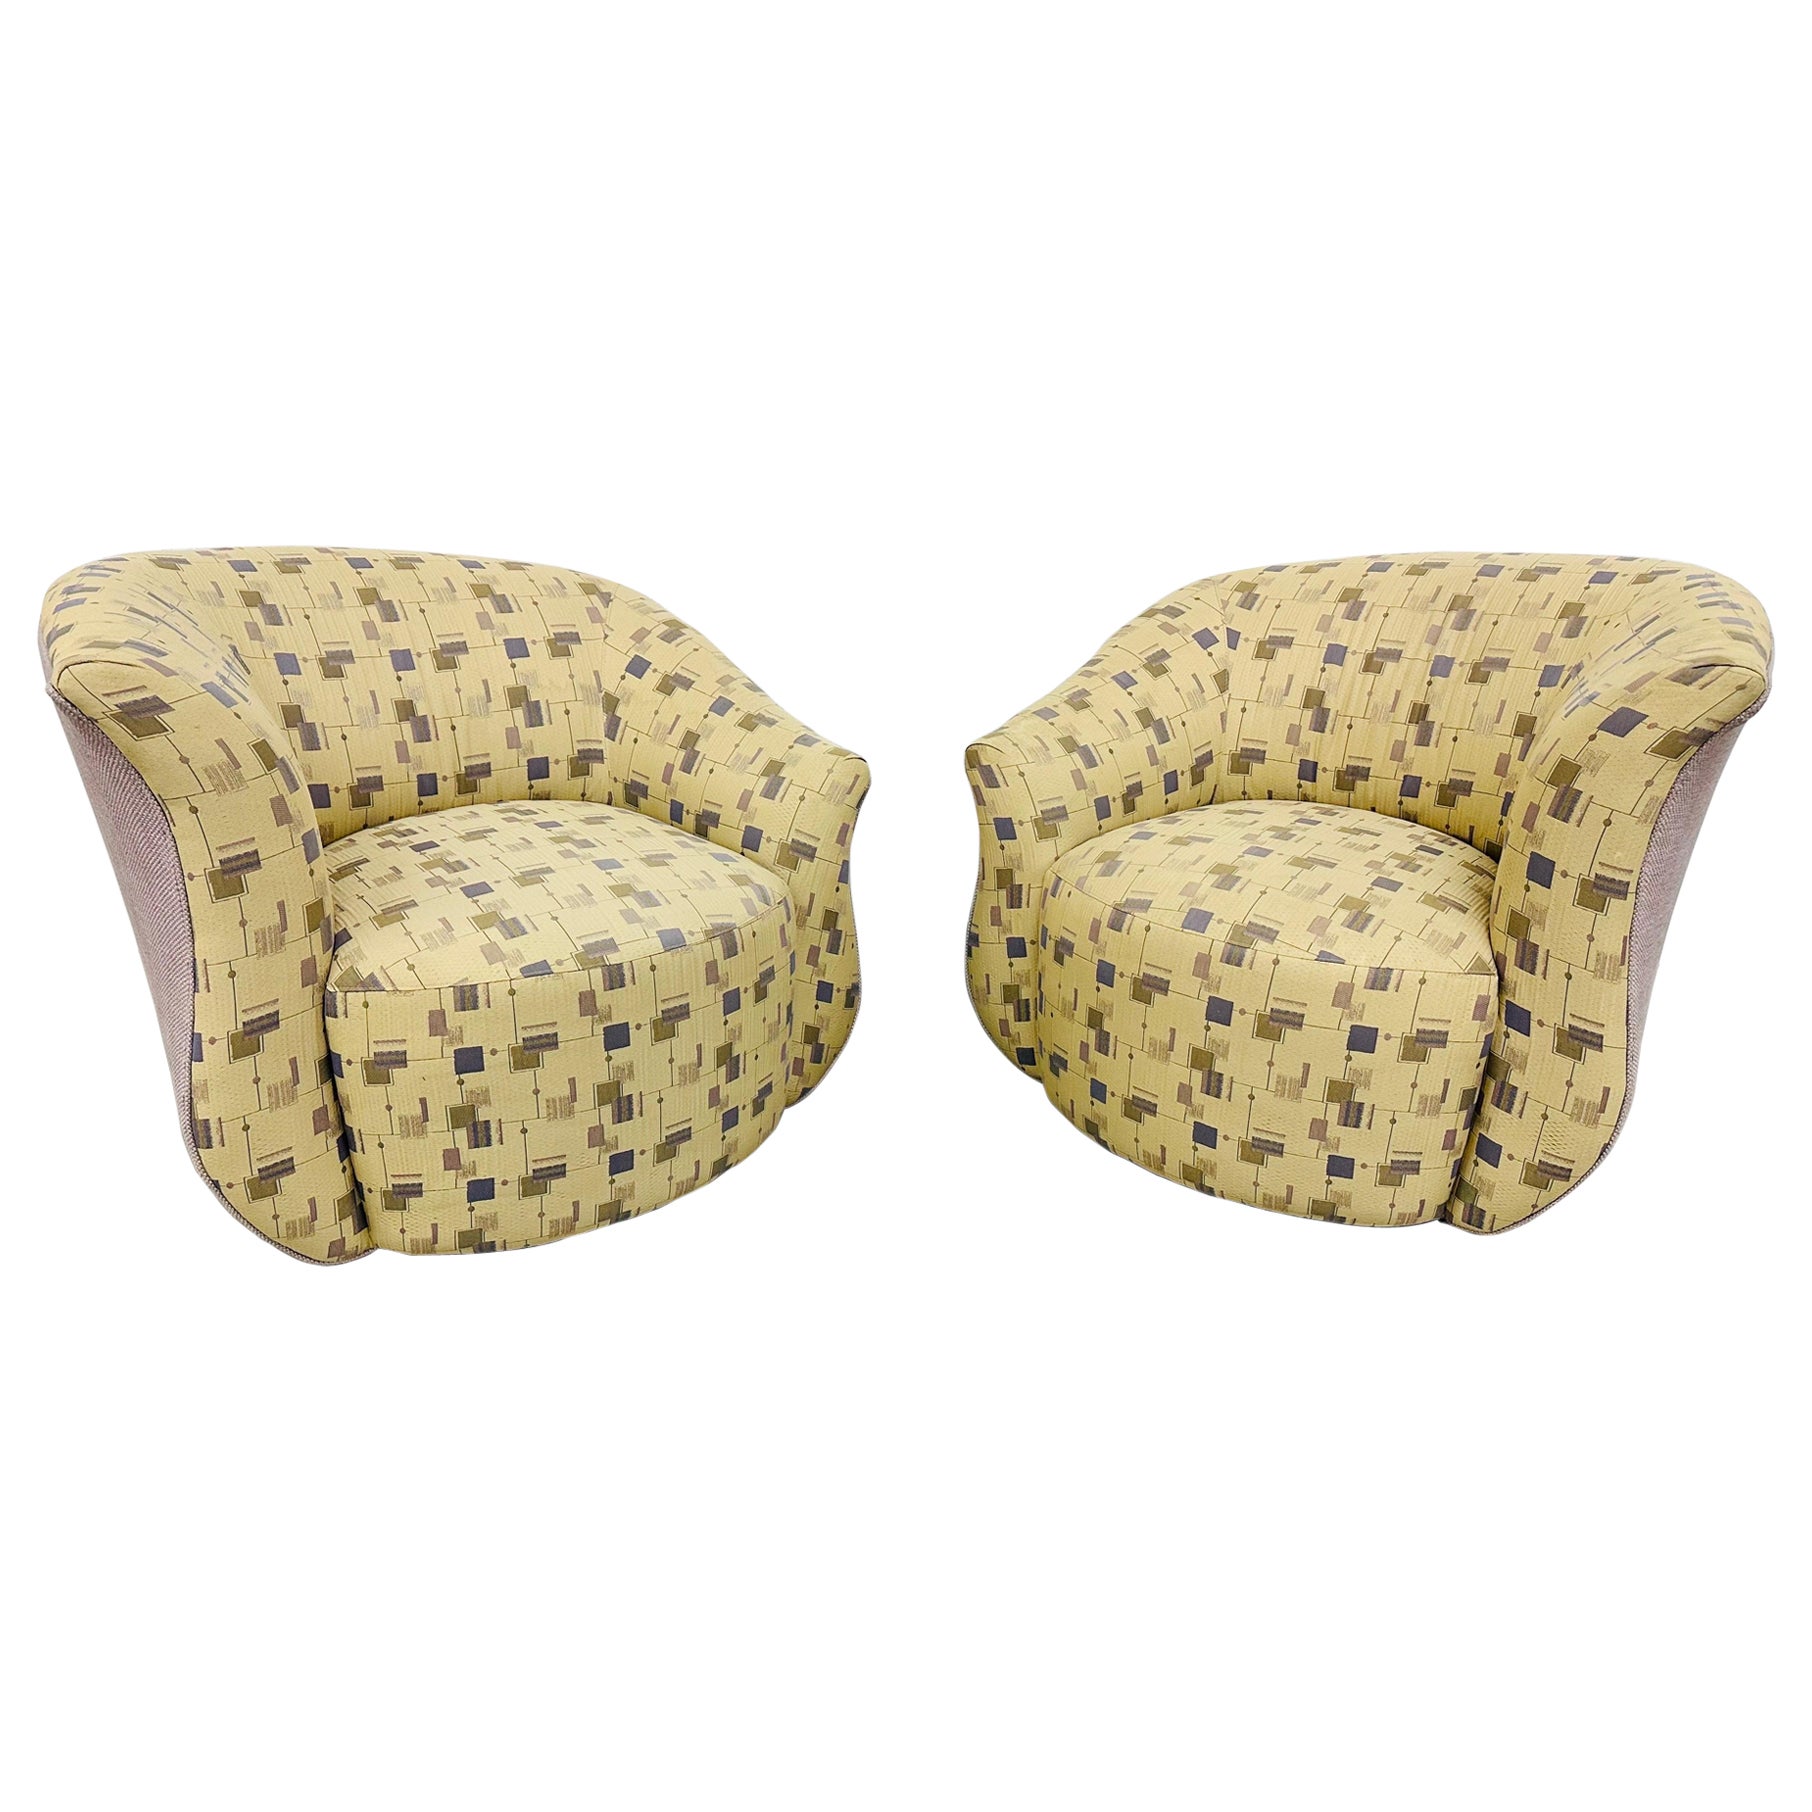 Post Modern Oversized Swivel Chairs - Set of 2 For Sale